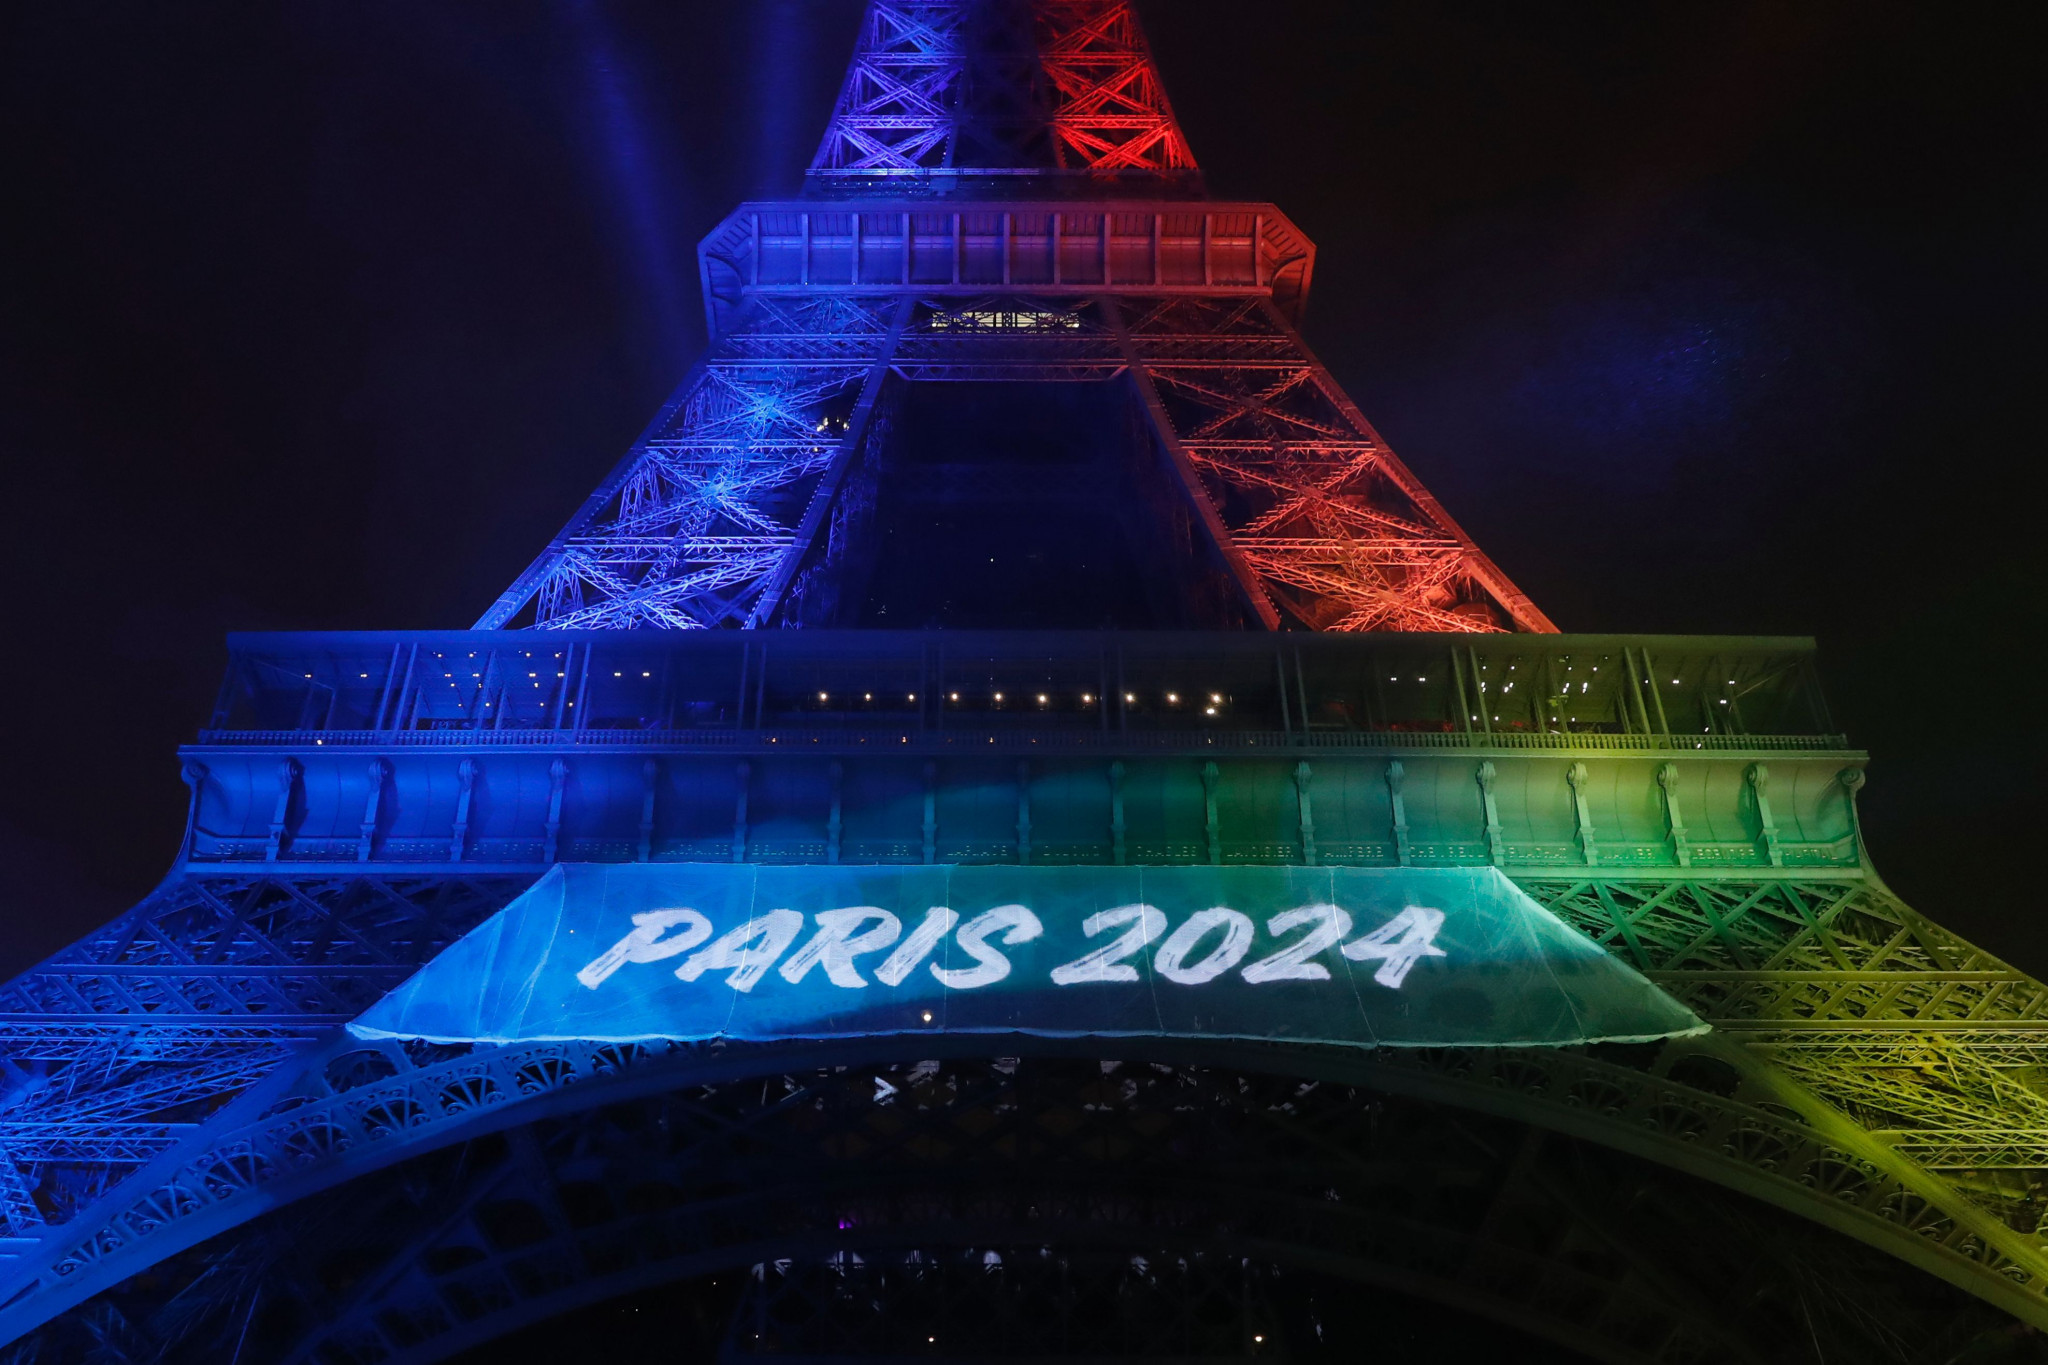 Transport, accommodation and human resources have all been targeted for huge savings by the Paris 2024 organisers in the wake of the COVID-19 pandemic ©Getty Images